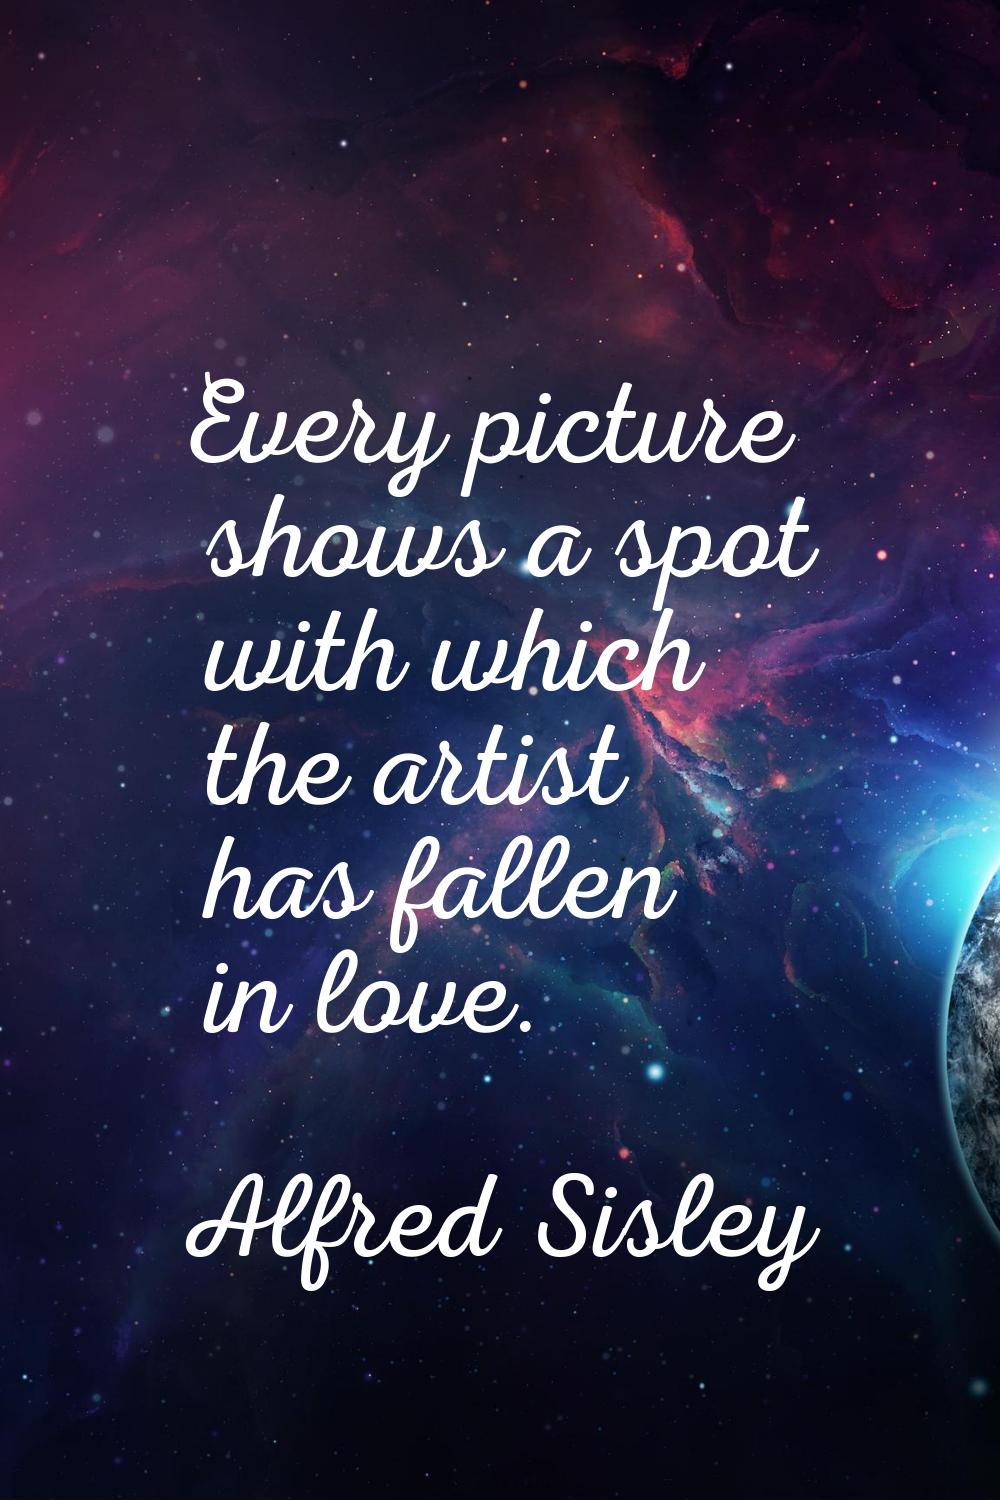 Every picture shows a spot with which the artist has fallen in love.